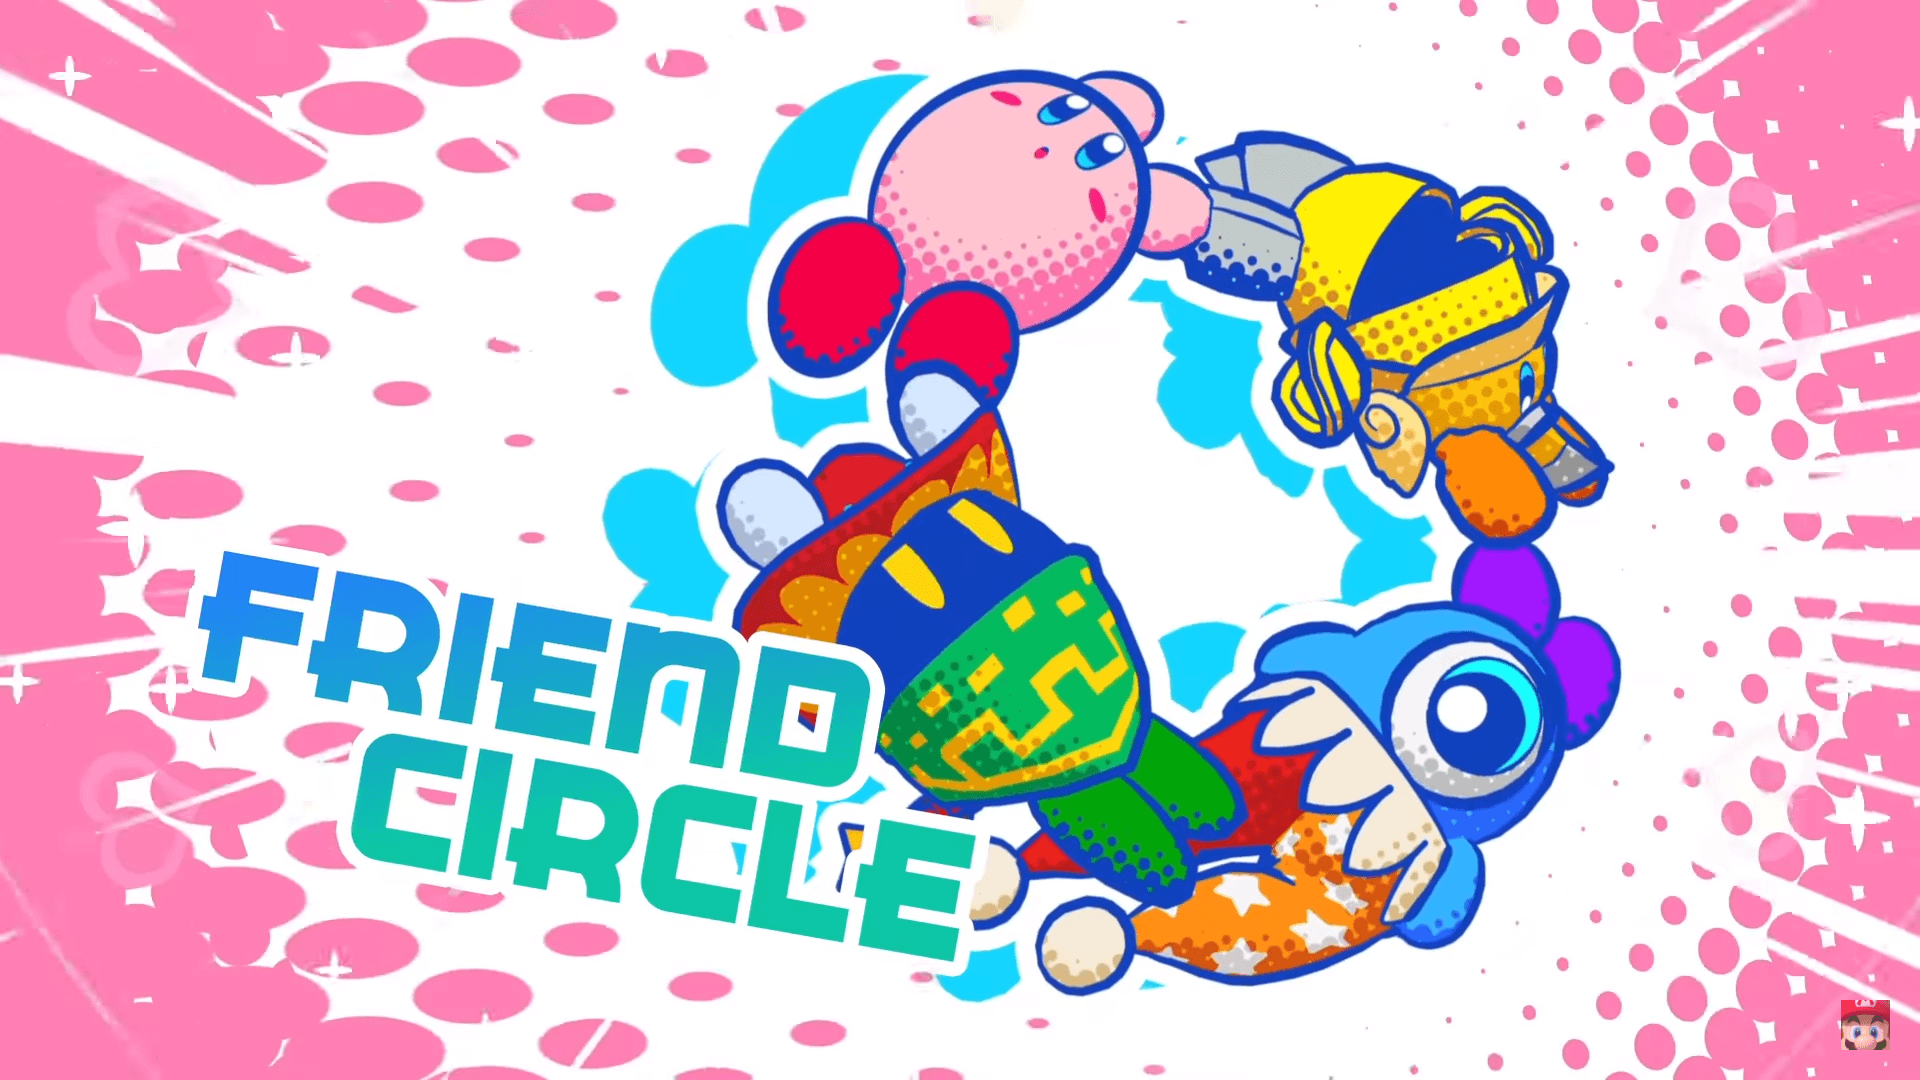 Kirby Star Allies Patch Adds Some Friendly Familiar Faces